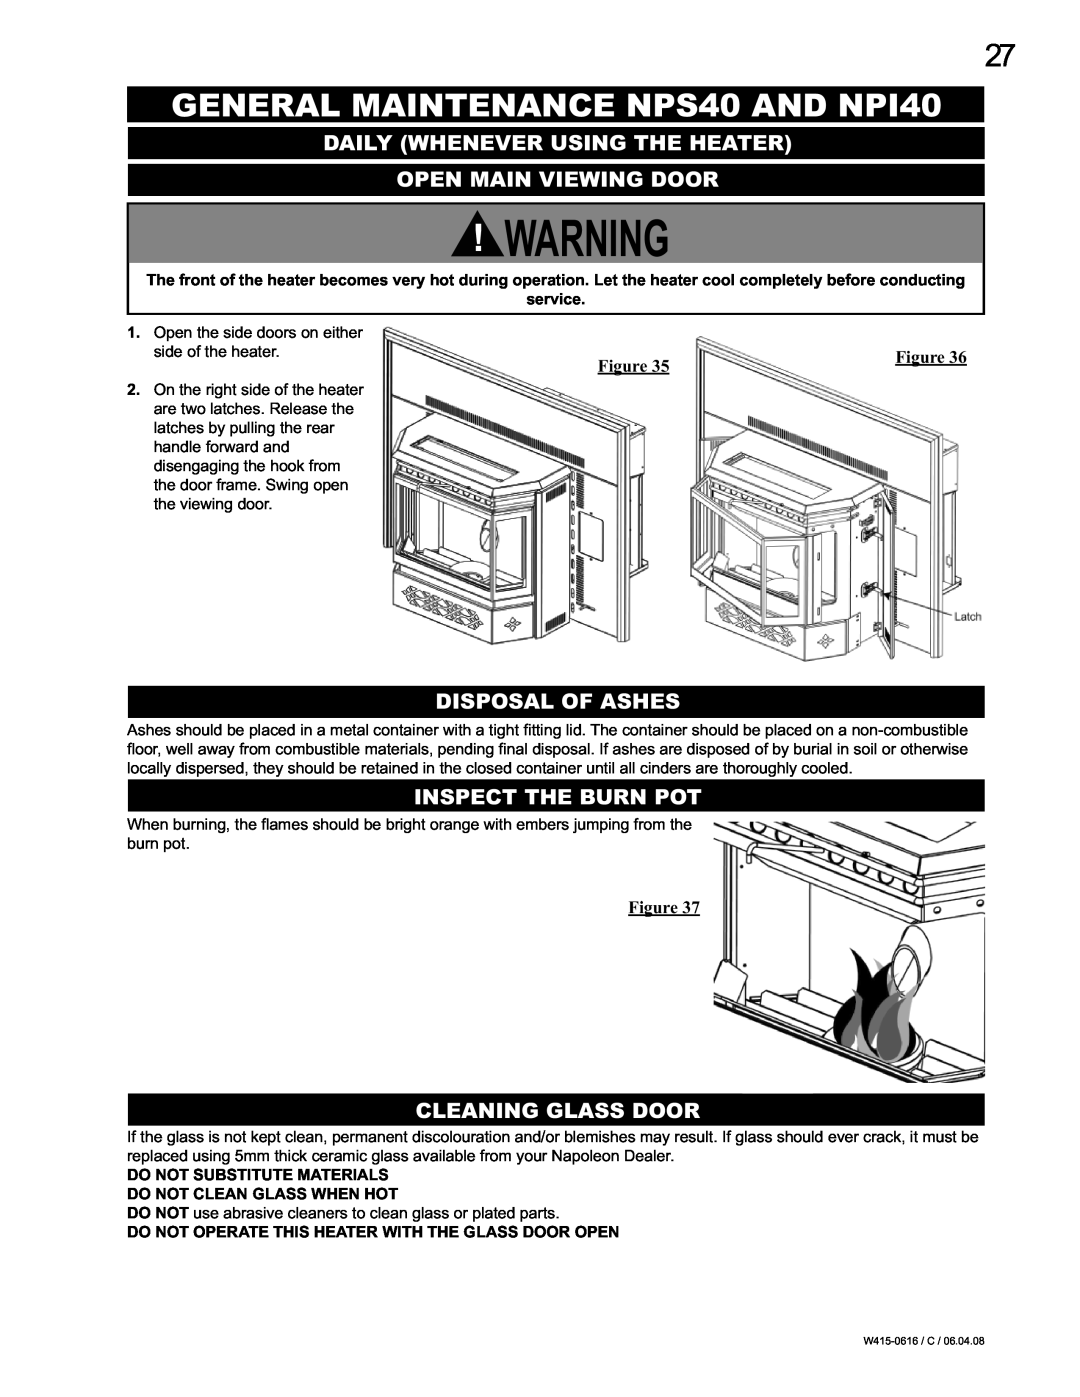 Napoleon Fireplaces manual GENERAL MAINTENANCE NPS40 AND NPI40, Daily Whenever Using The Heater, Open Main Viewing Door 